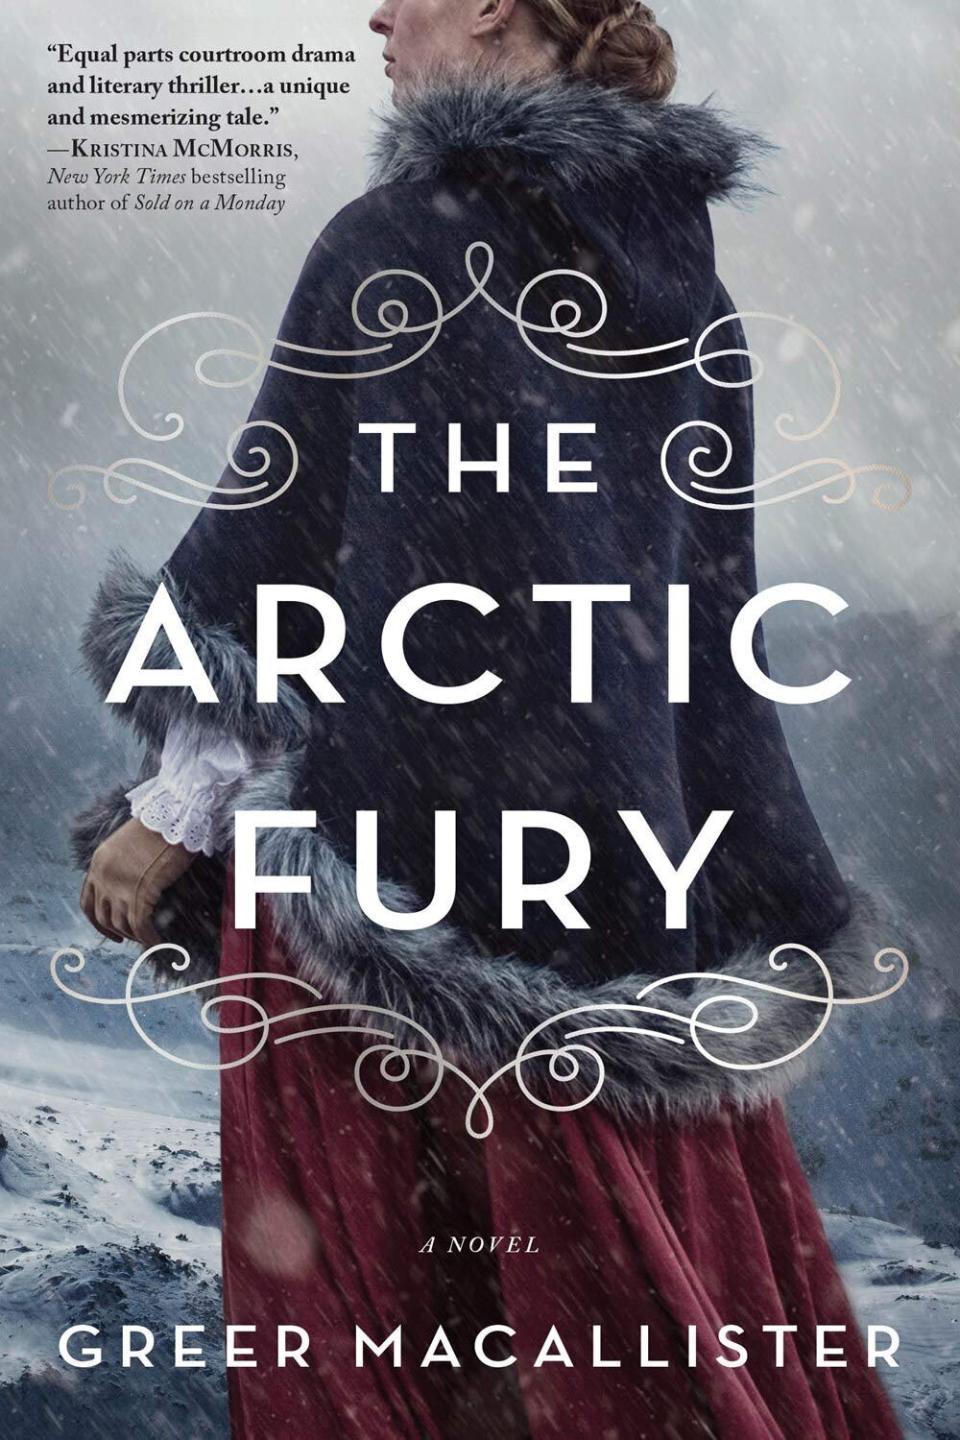 &ldquo;The Arctic Fury&rdquo; is another book this month that uses a real historical event as a springboard for mystery and adventure. Eccentric Lady Jane Franklin proposes a radical strategy for finding her husband&rsquo;s lost expedition into the Arctic during the 1850s: Send a crew of women to find the ship, led by adventurer Virginia Reeve. But when only five women return, Virginia faces charges of murder and endless questions about what happened out in the cold. Read more about it on <a href="https://www.goodreads.com/book/show/51684880-the-arctic-fury">Goodreads</a>, and grab a copy on <a href="https://amzn.to/33yyYHG">Amazon</a> or <a href="https://fave.co/2Vqm2Pv">Bookshop</a>.<br /><br /><i>Expected release date:</i> <i>December 1</i>